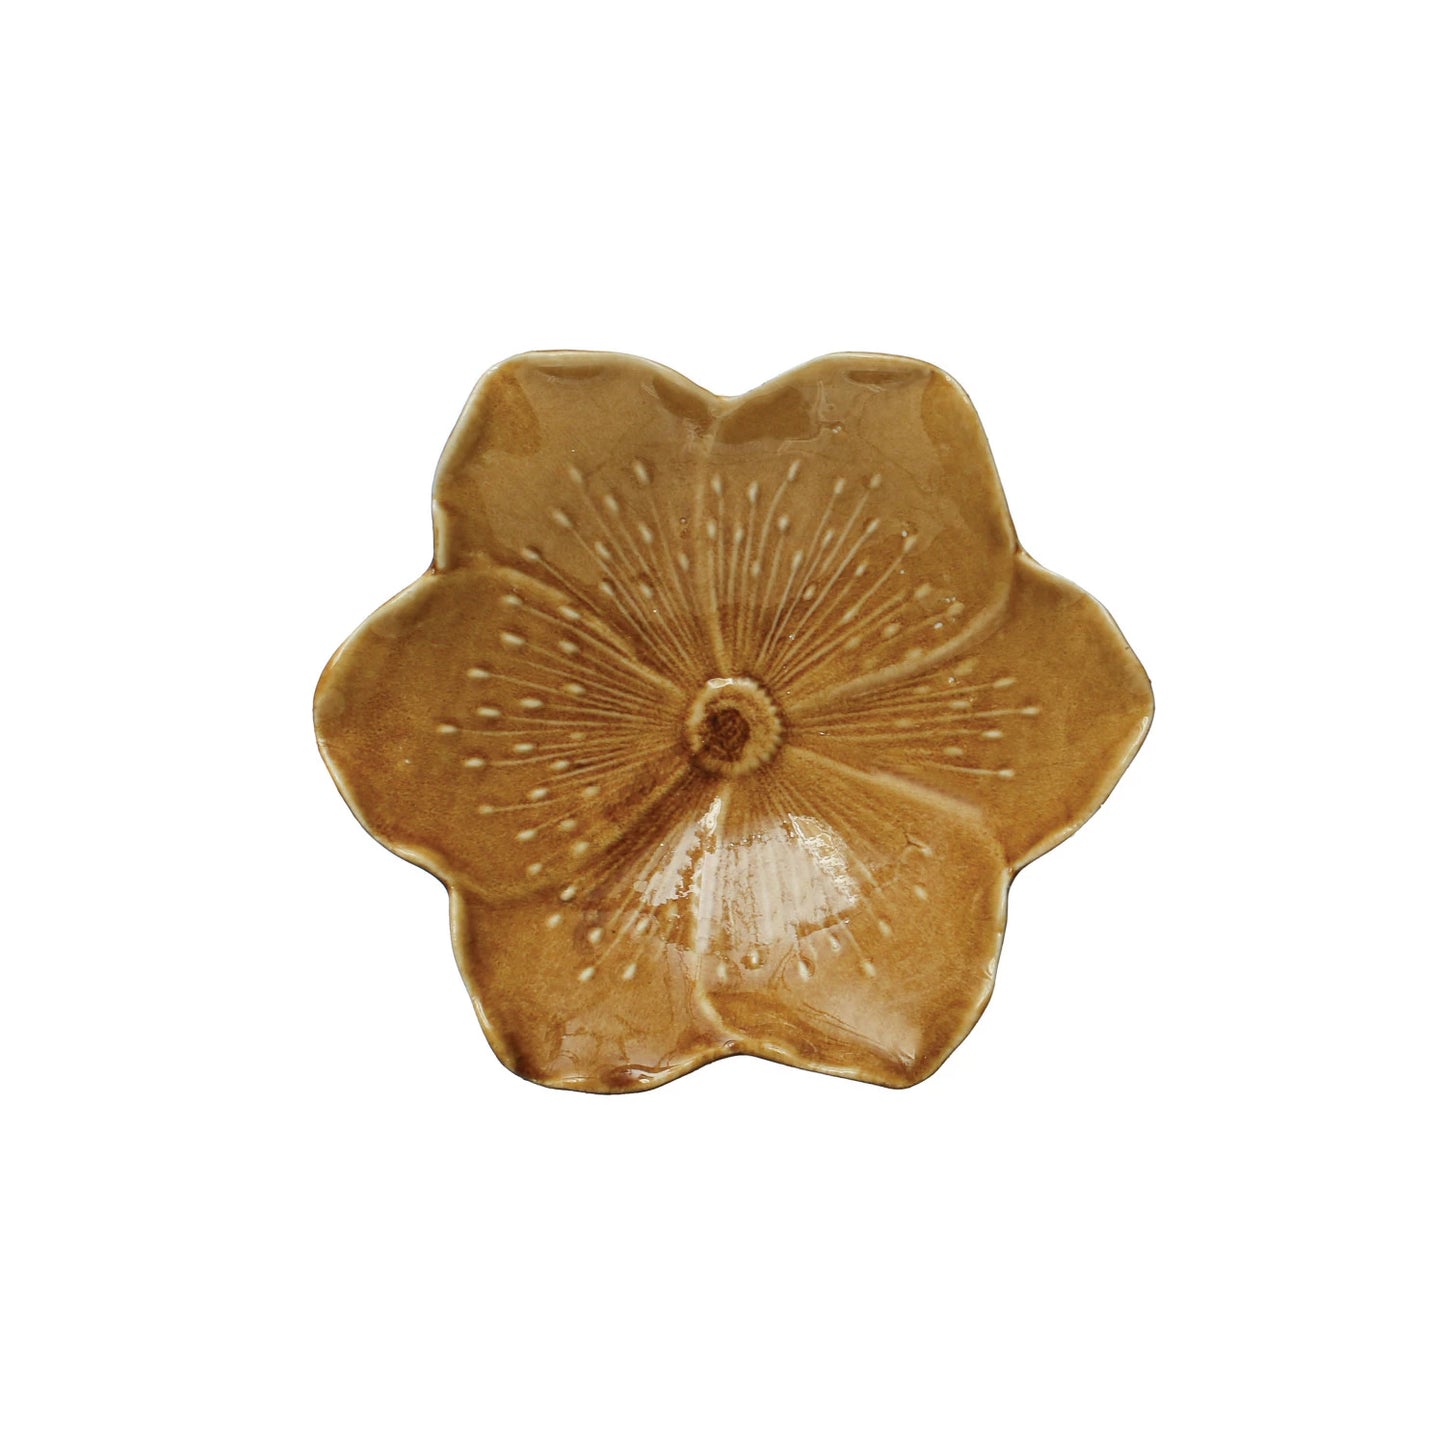 top view of the small stoneware flower plate displayed on a white background